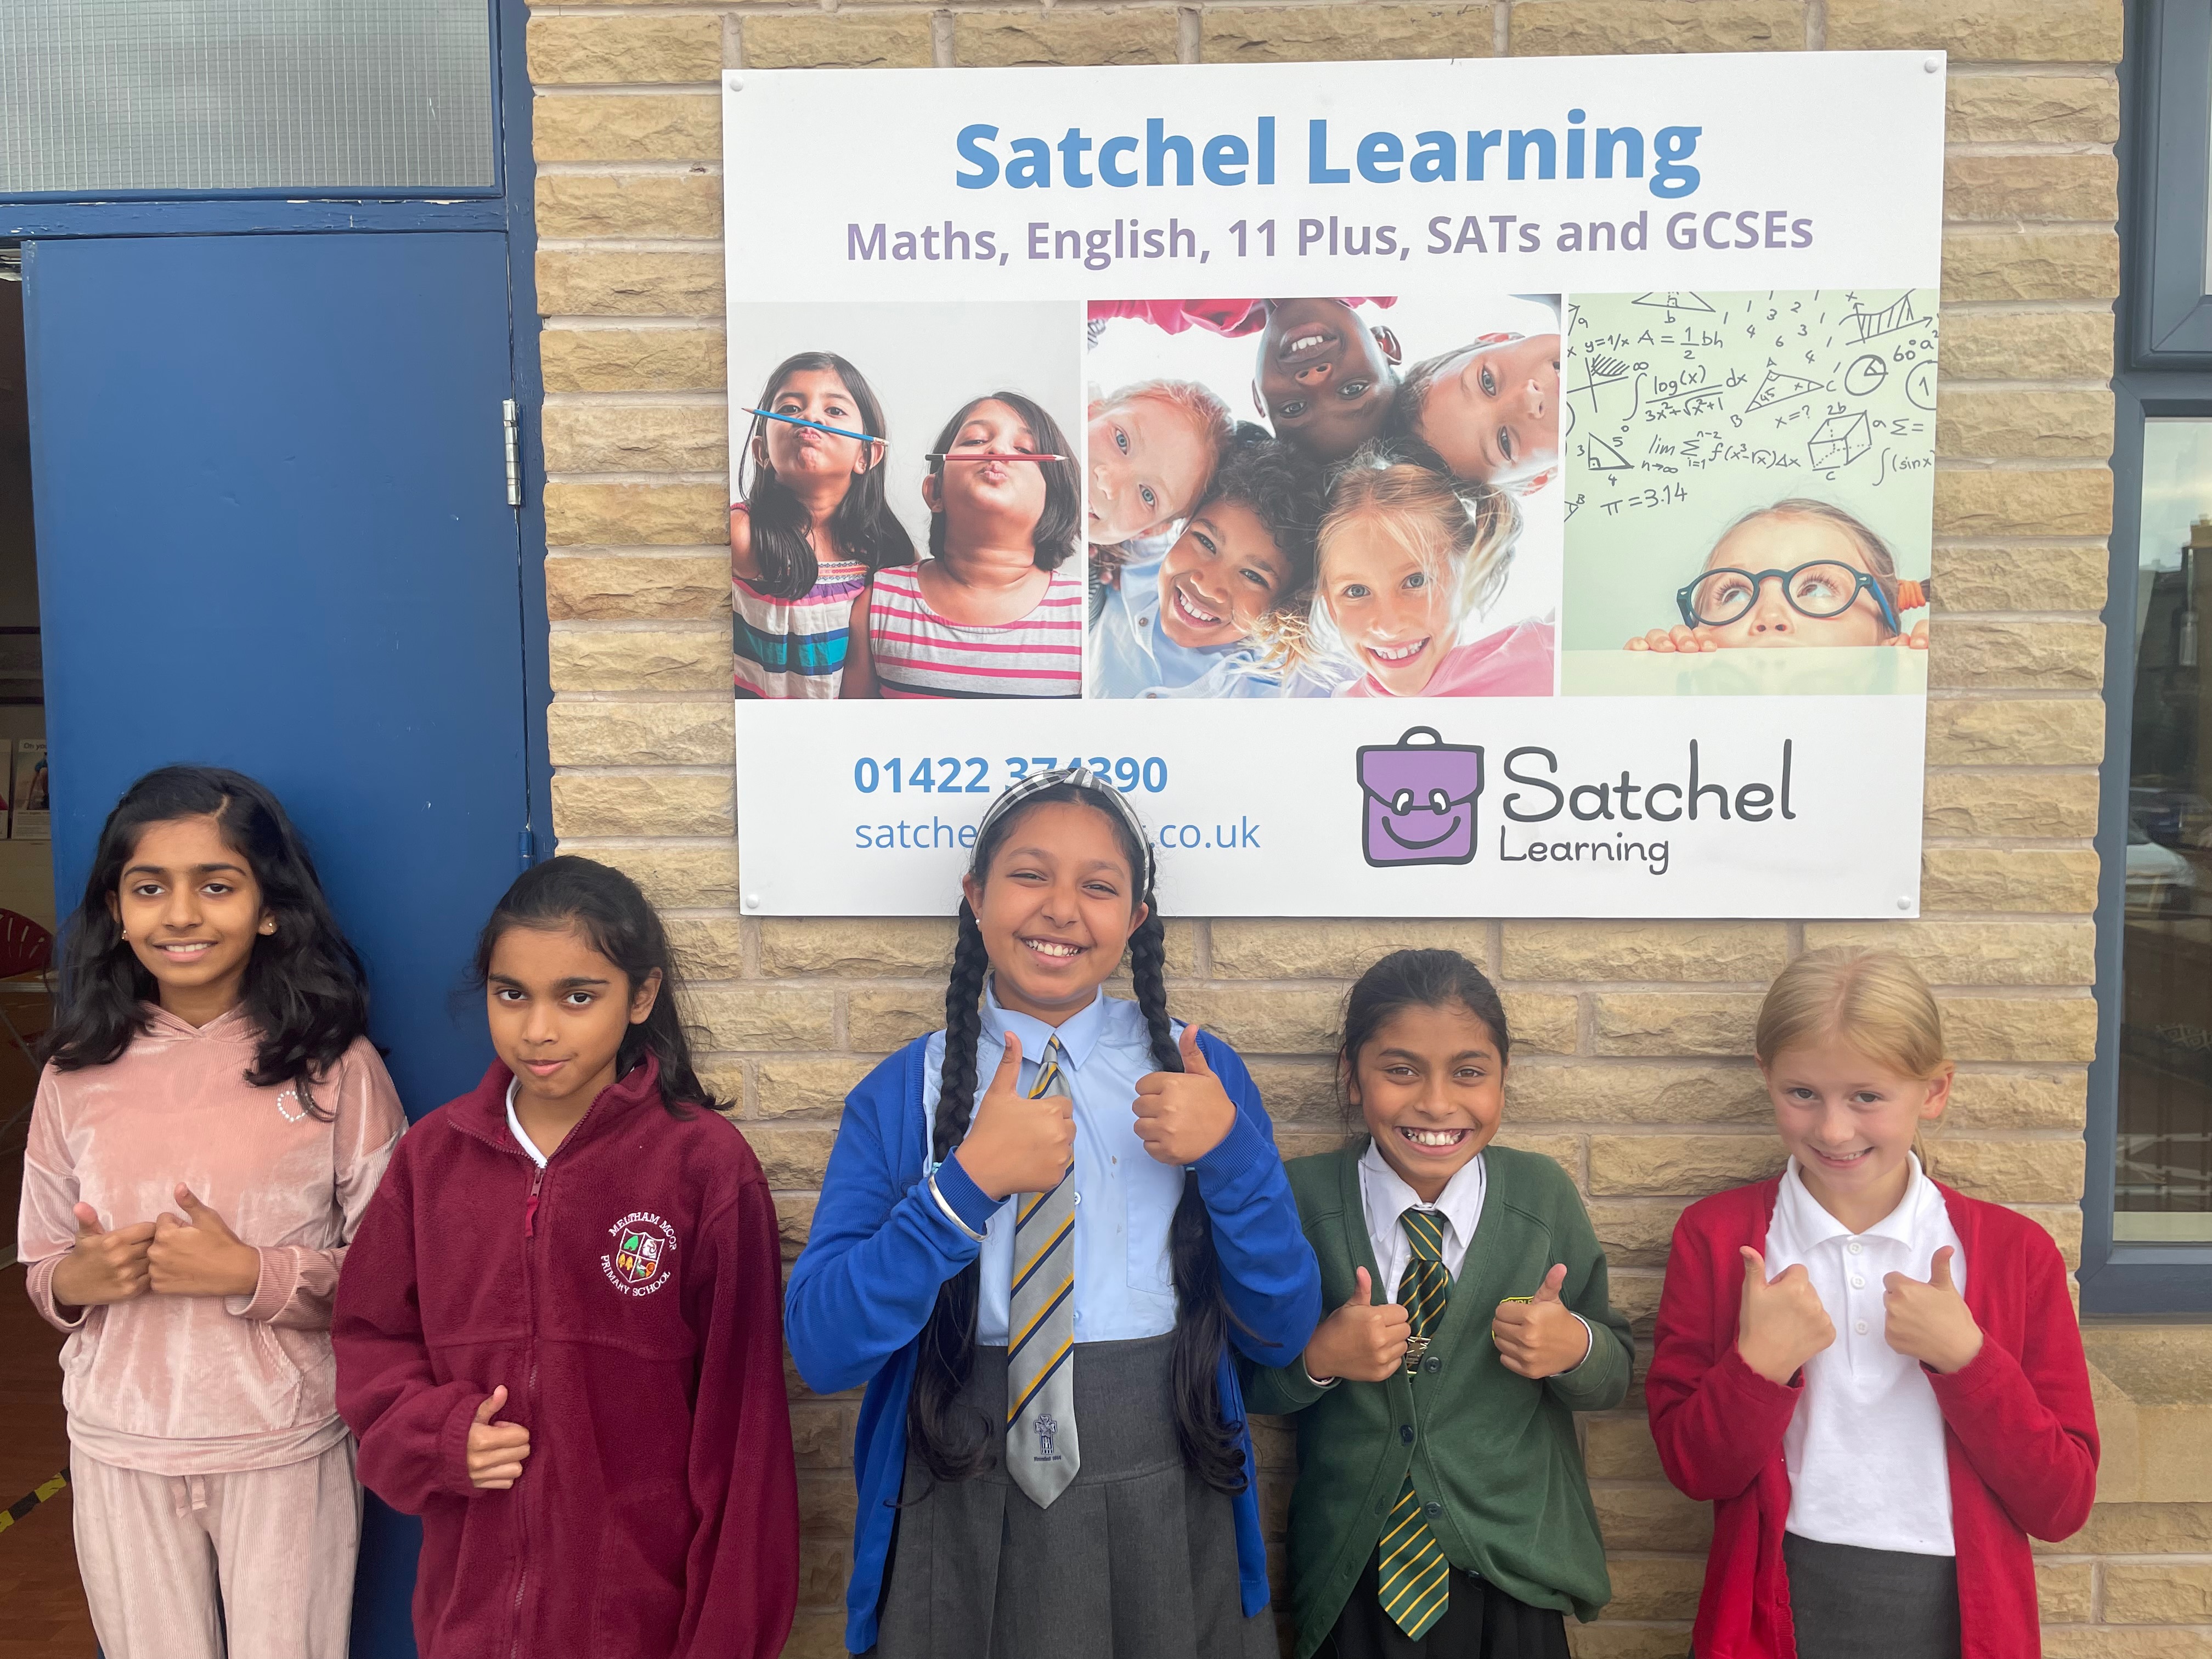 Good luck to this year's 11 Plus children! Satchel Learning